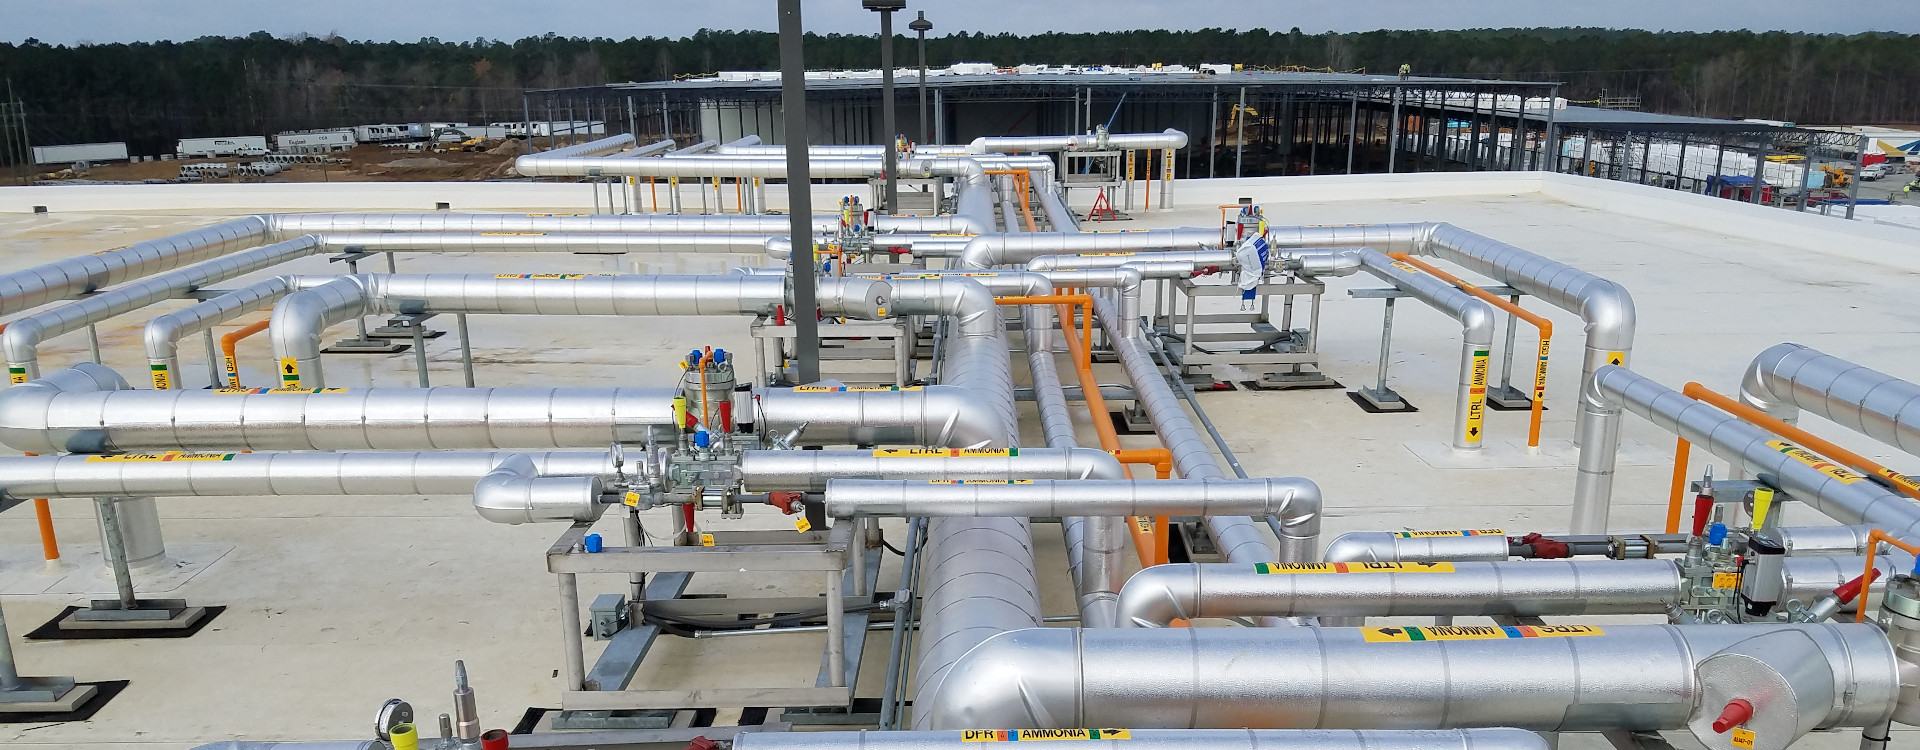 Industrial refrigeration rooftop piping